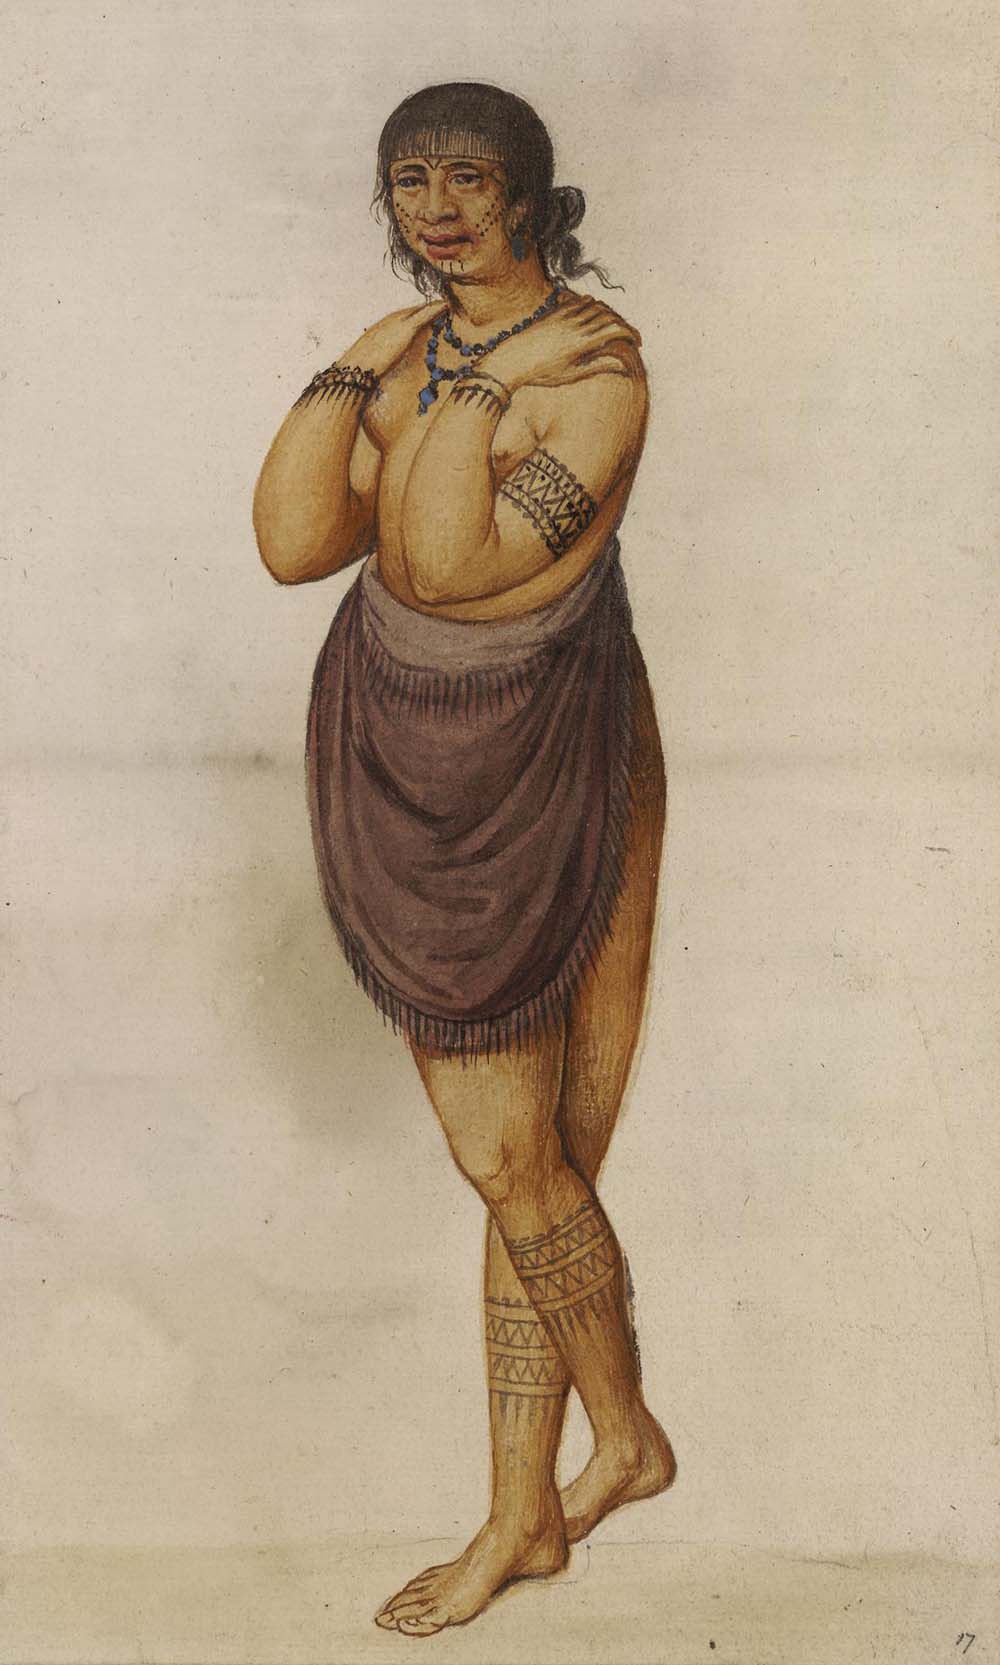 An elite woman of the Pamlico River region, tattooed on her face, arms, and legs, by John White, c. 1585.